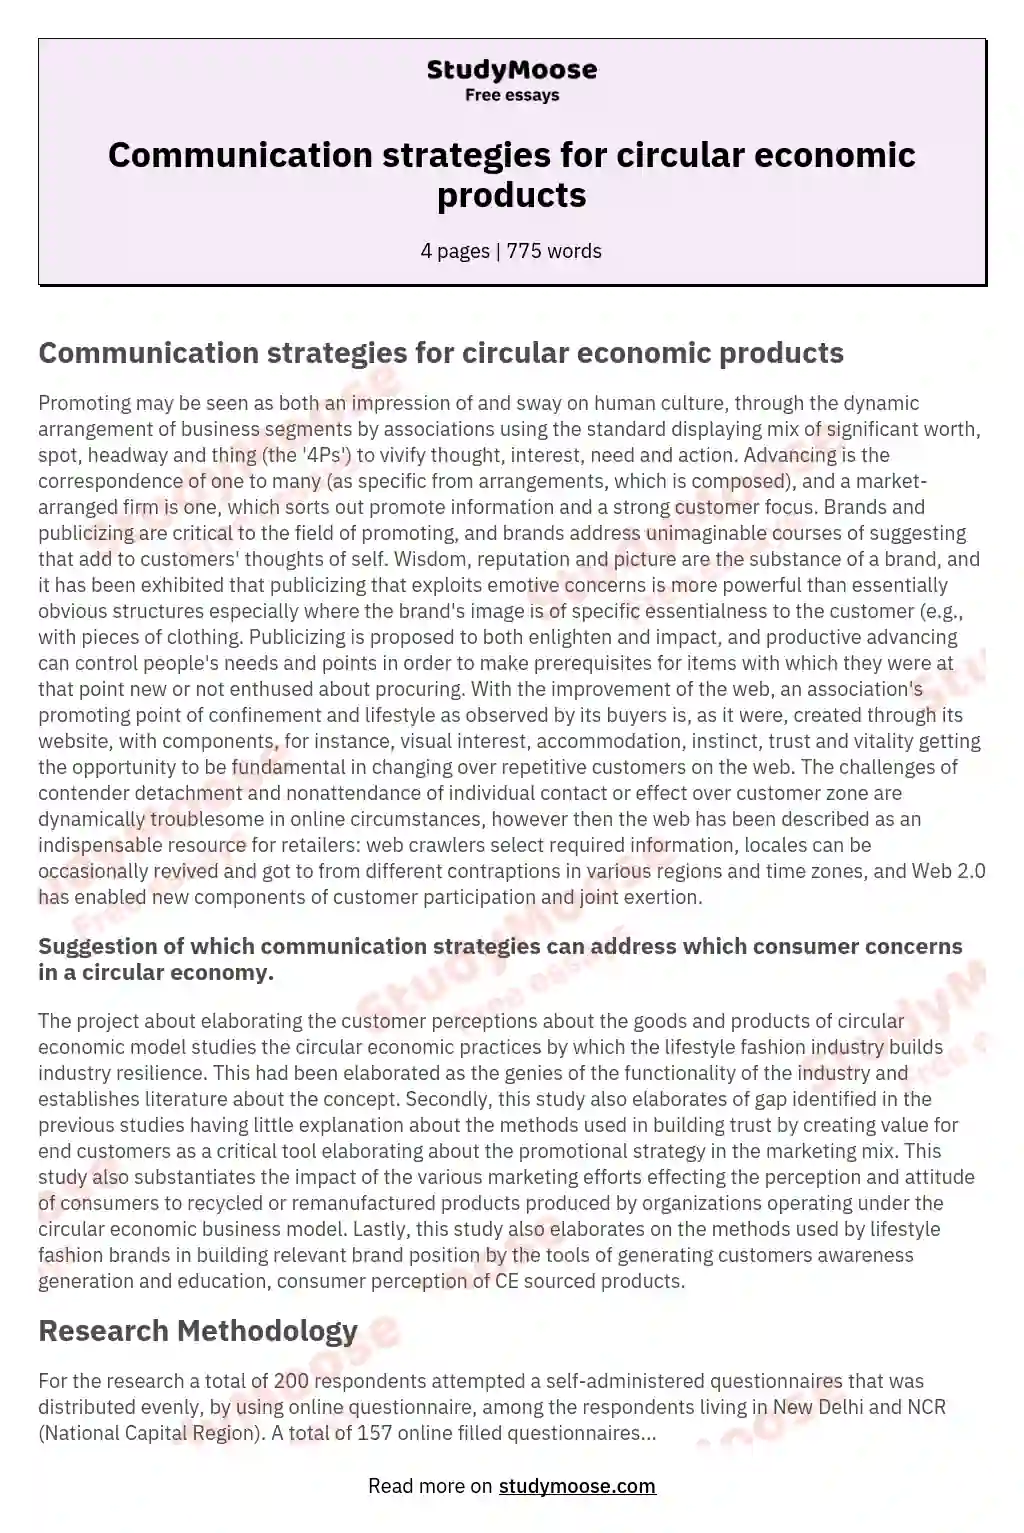 Communication strategies for circular economic products essay